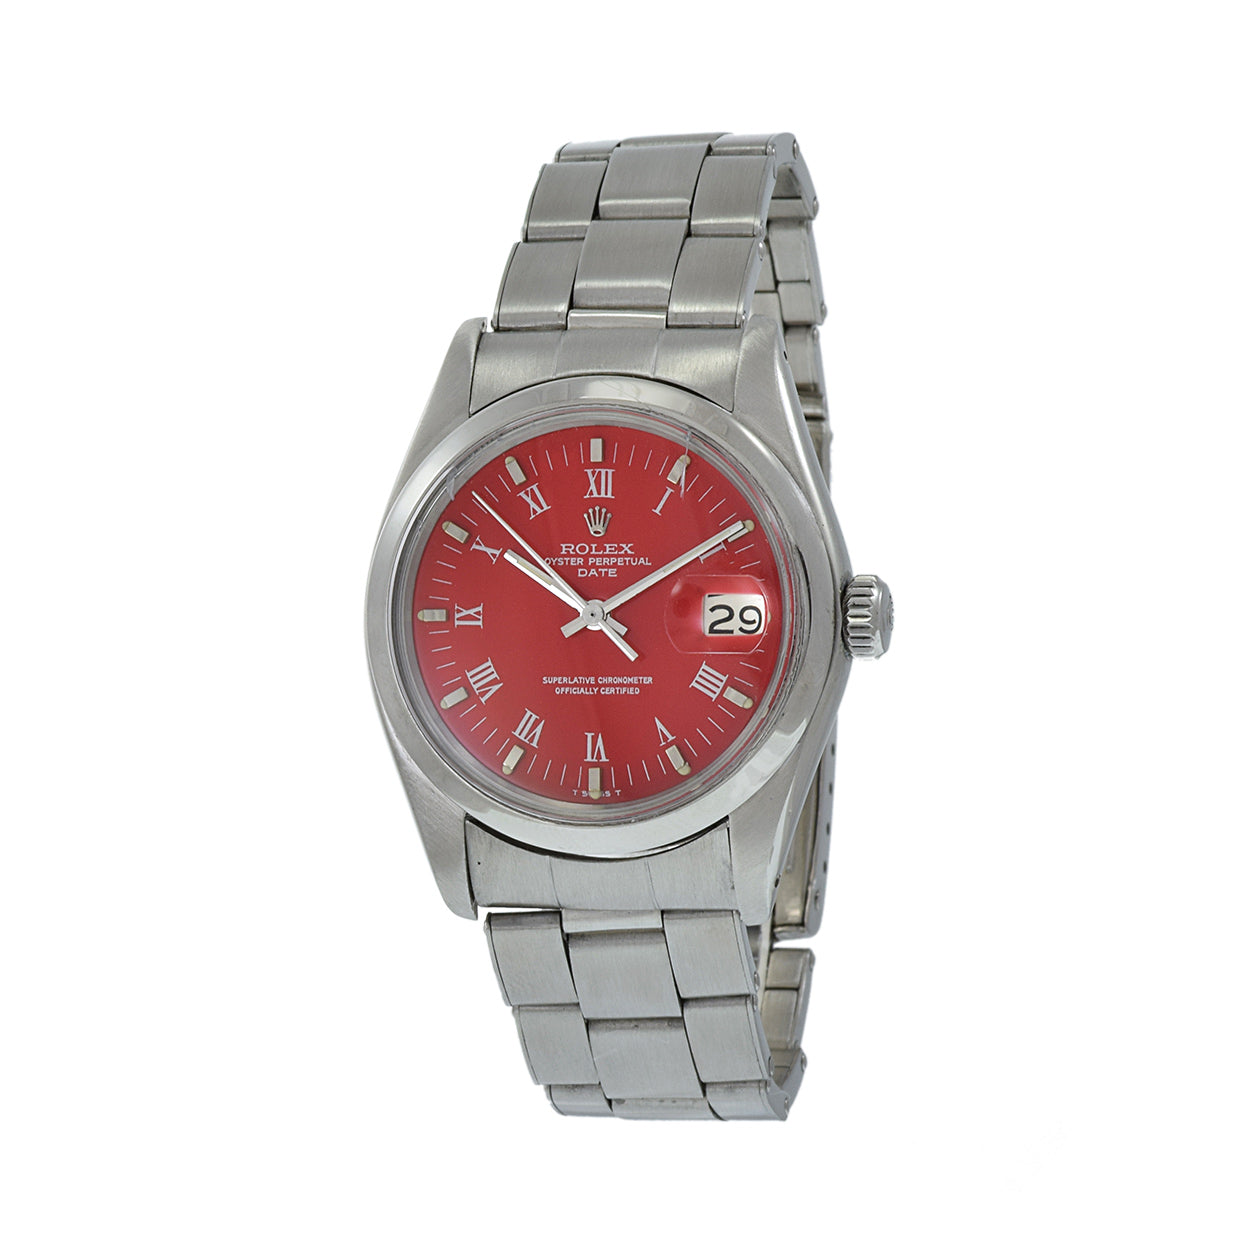 Vintage 1977 Rolex Date Reference 1500 Custom Red Dial Automatic Watch